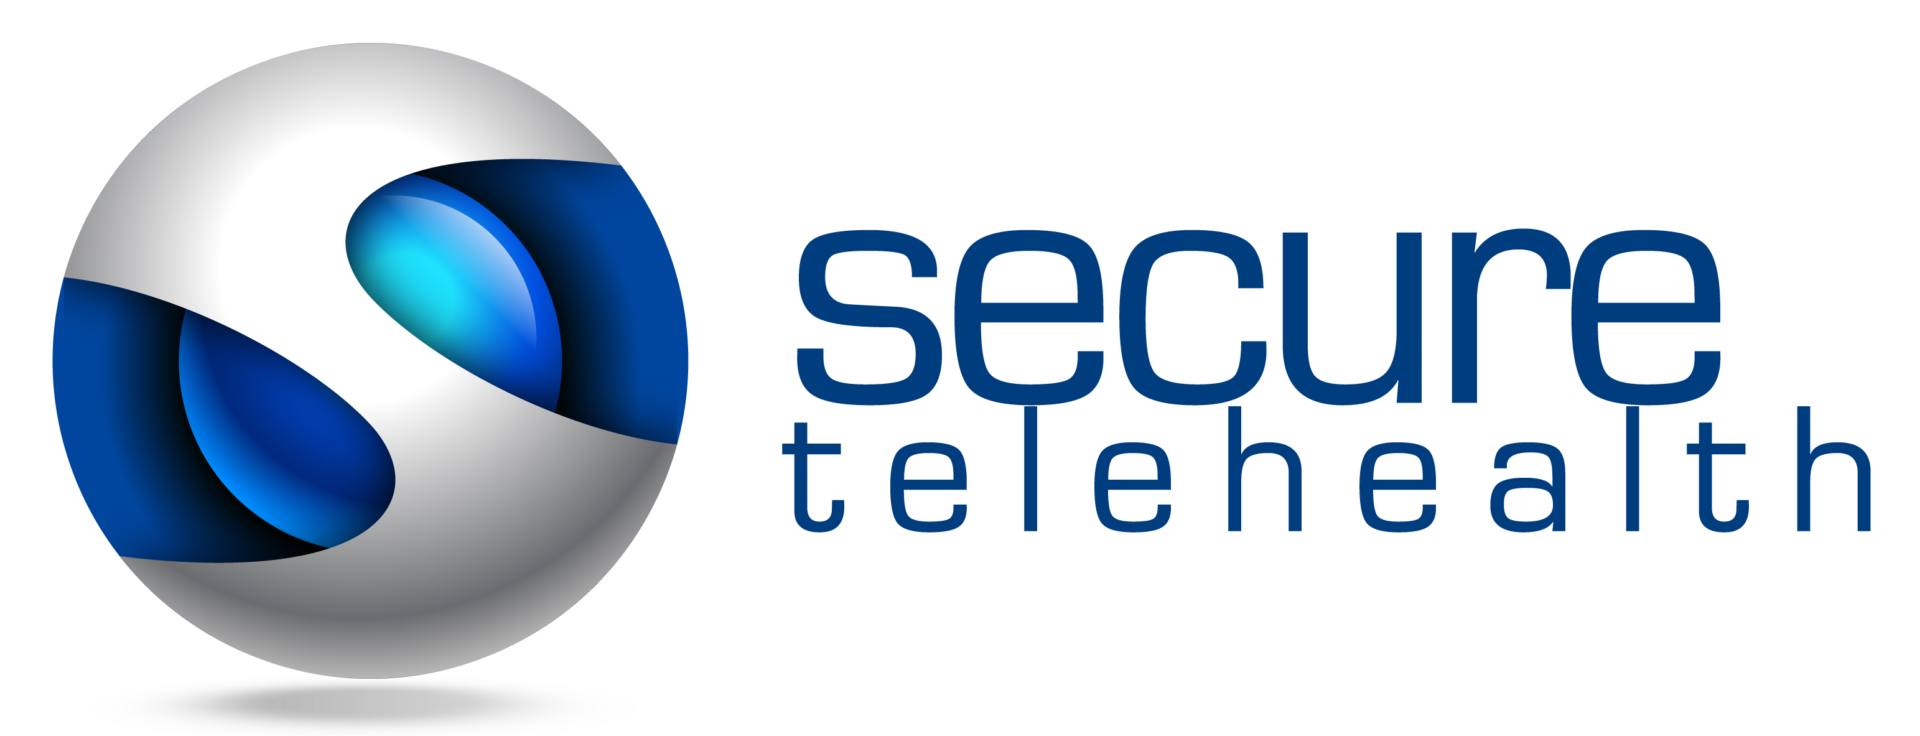 Secure Telehealth Logo in Small Size One